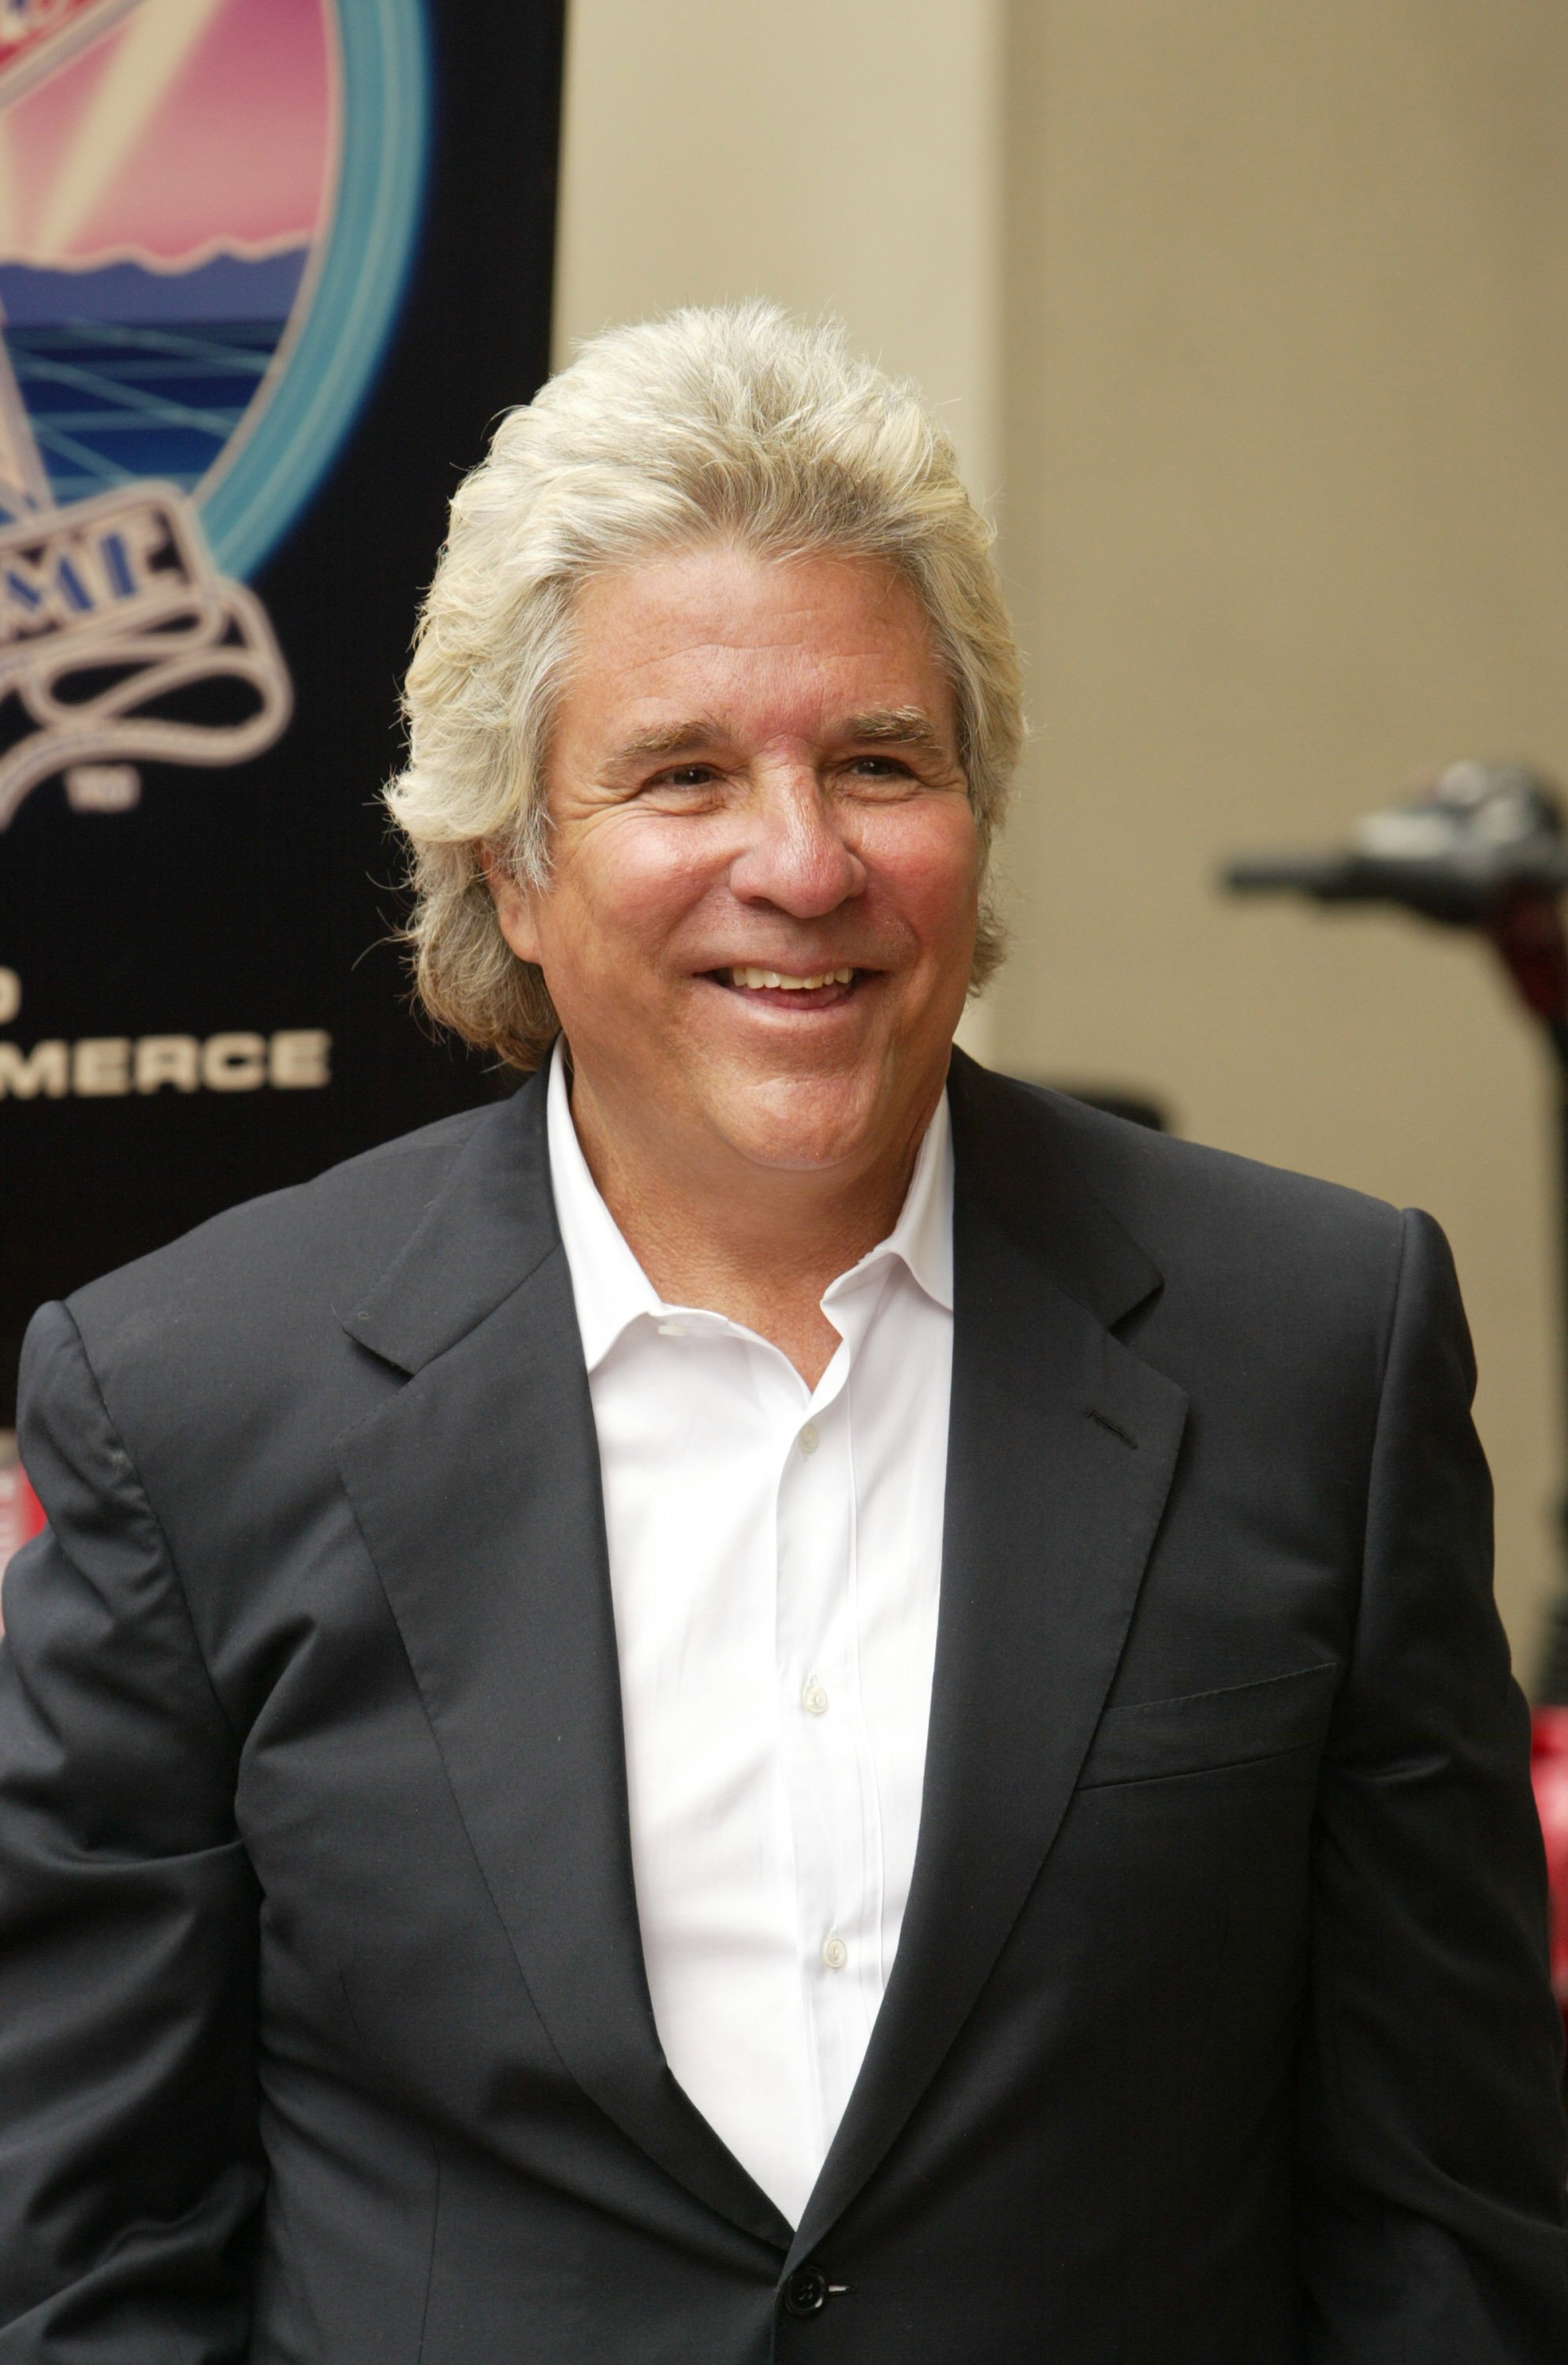 Jon Peters receives his star on the walk of fame in May 2007. | Source: Getty Images.